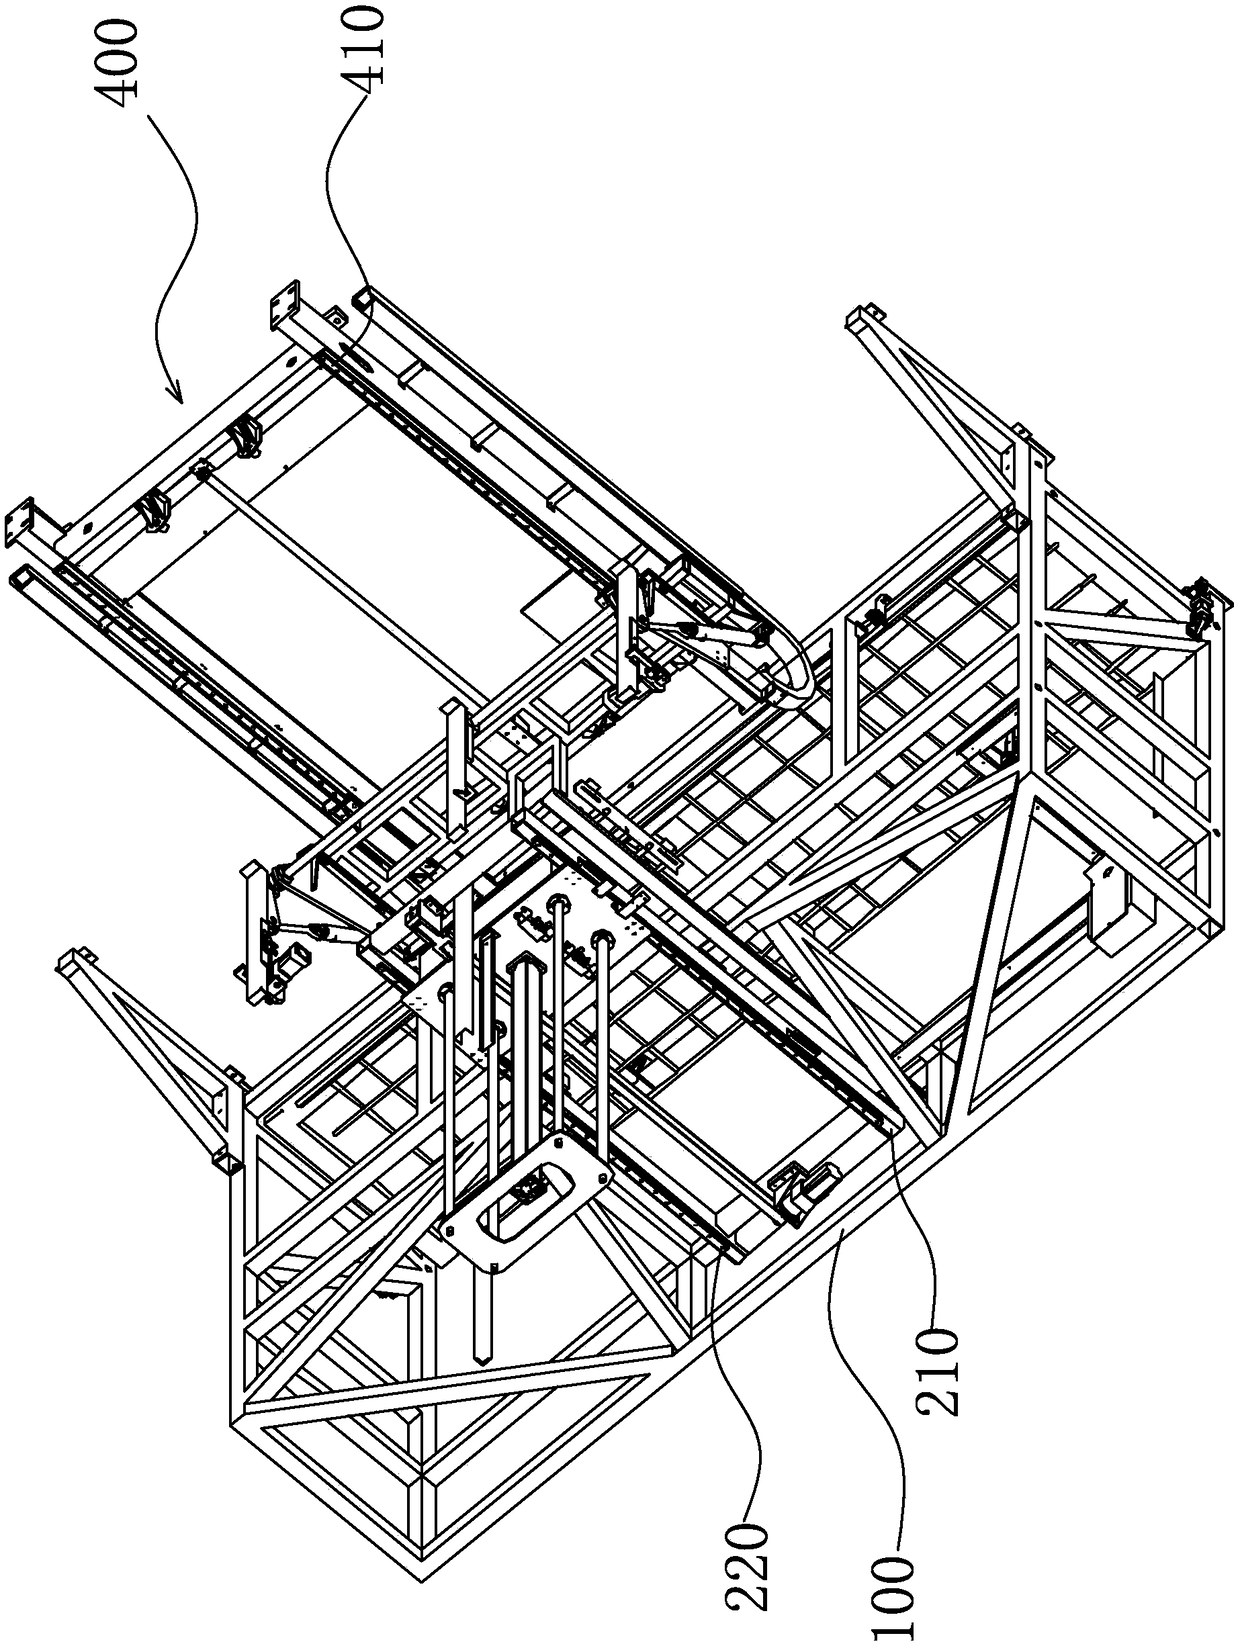 Mesh piece lifting, steering and feeding execution mechanism